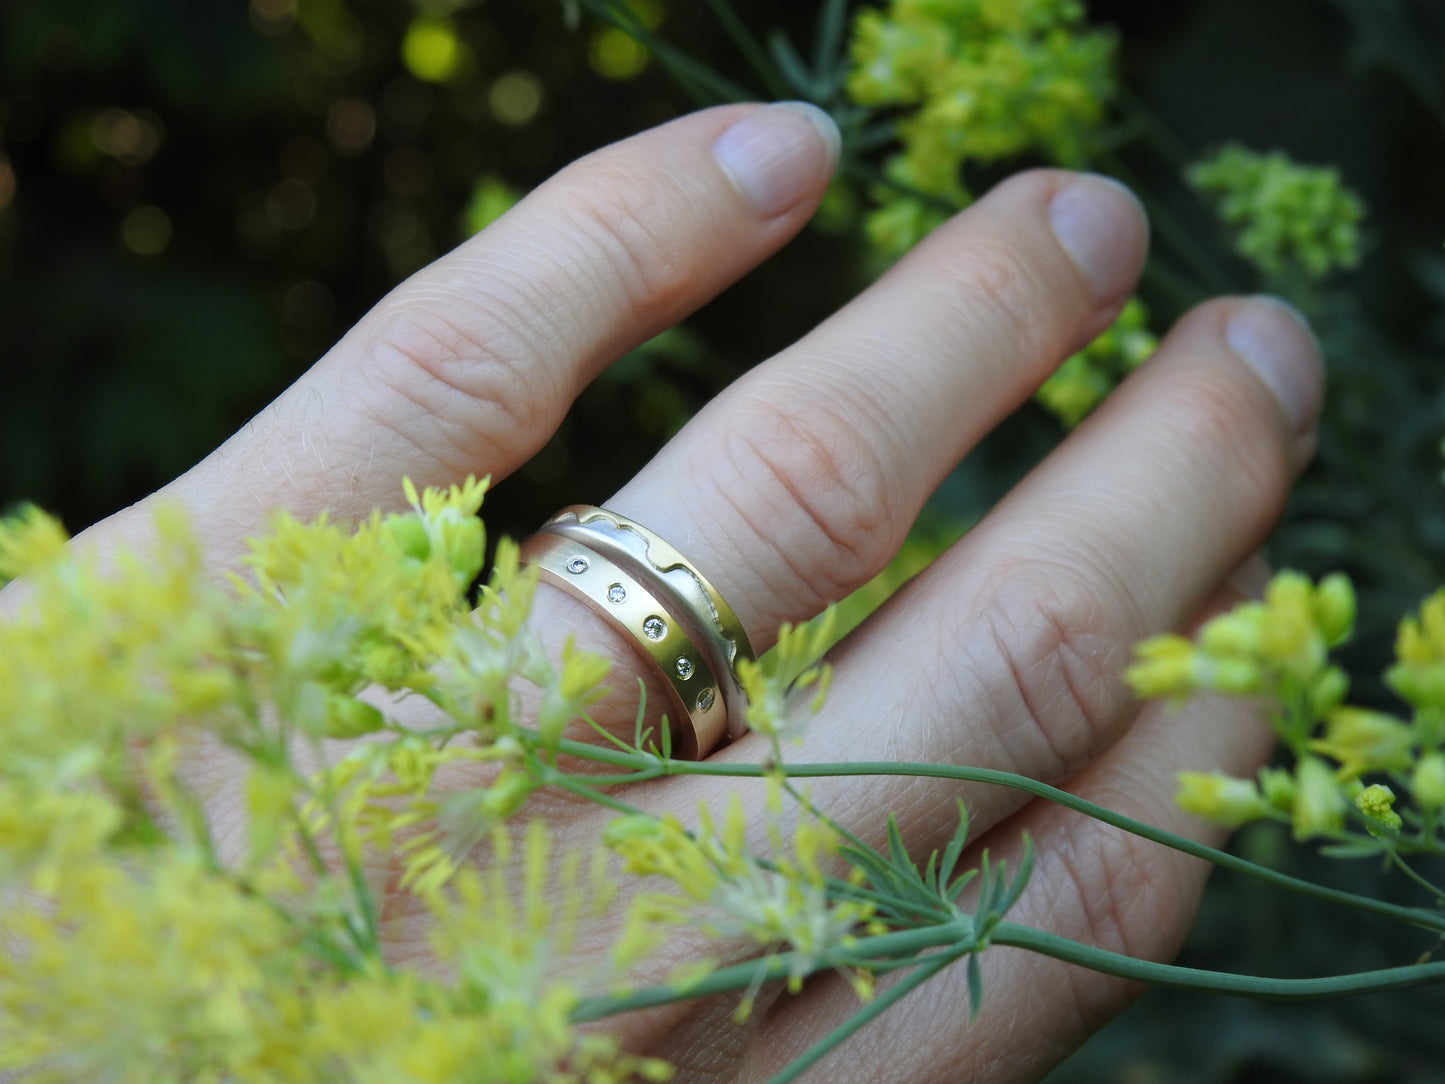 Canadian, local, handmade jewellery and commissioned wedding band and engagement rings By ZEALmetal, Nicole Horlor, in Kingston, ON, Canada